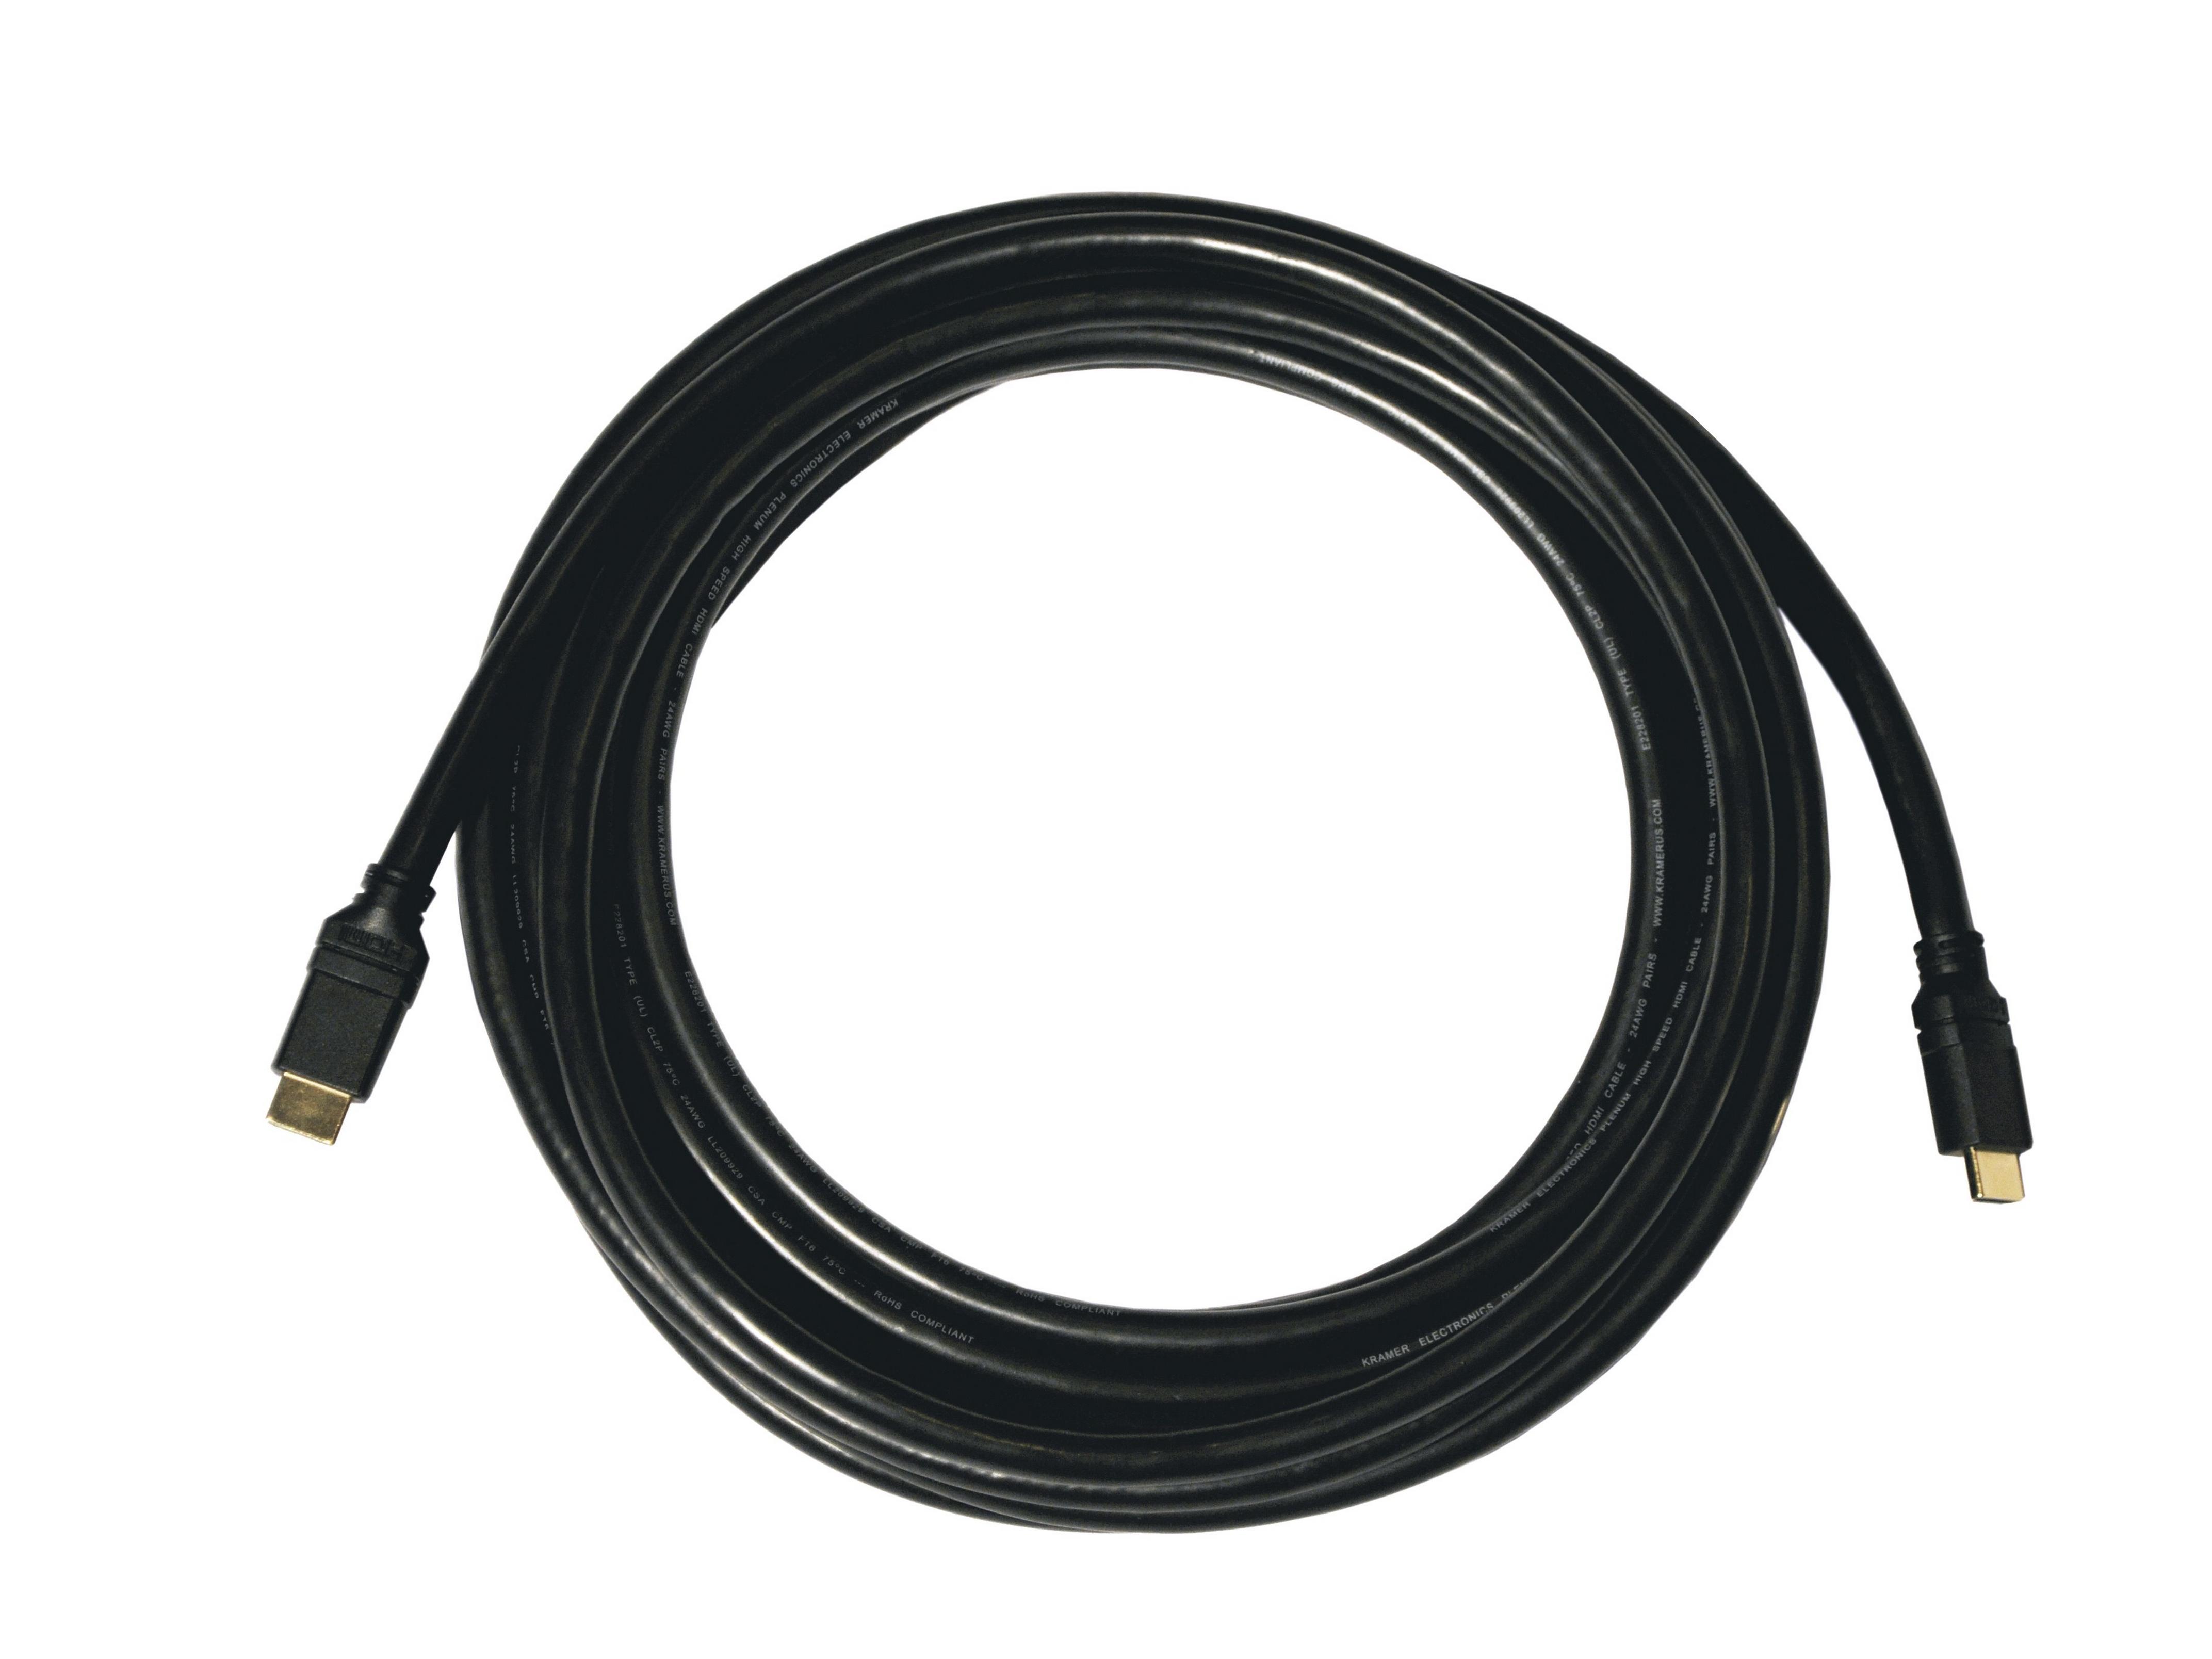 CP-HM/HM/ETH-25 25ft HDMI (M) to HDMI (M) Plenum Rated Cable with Ethernet by Kramer